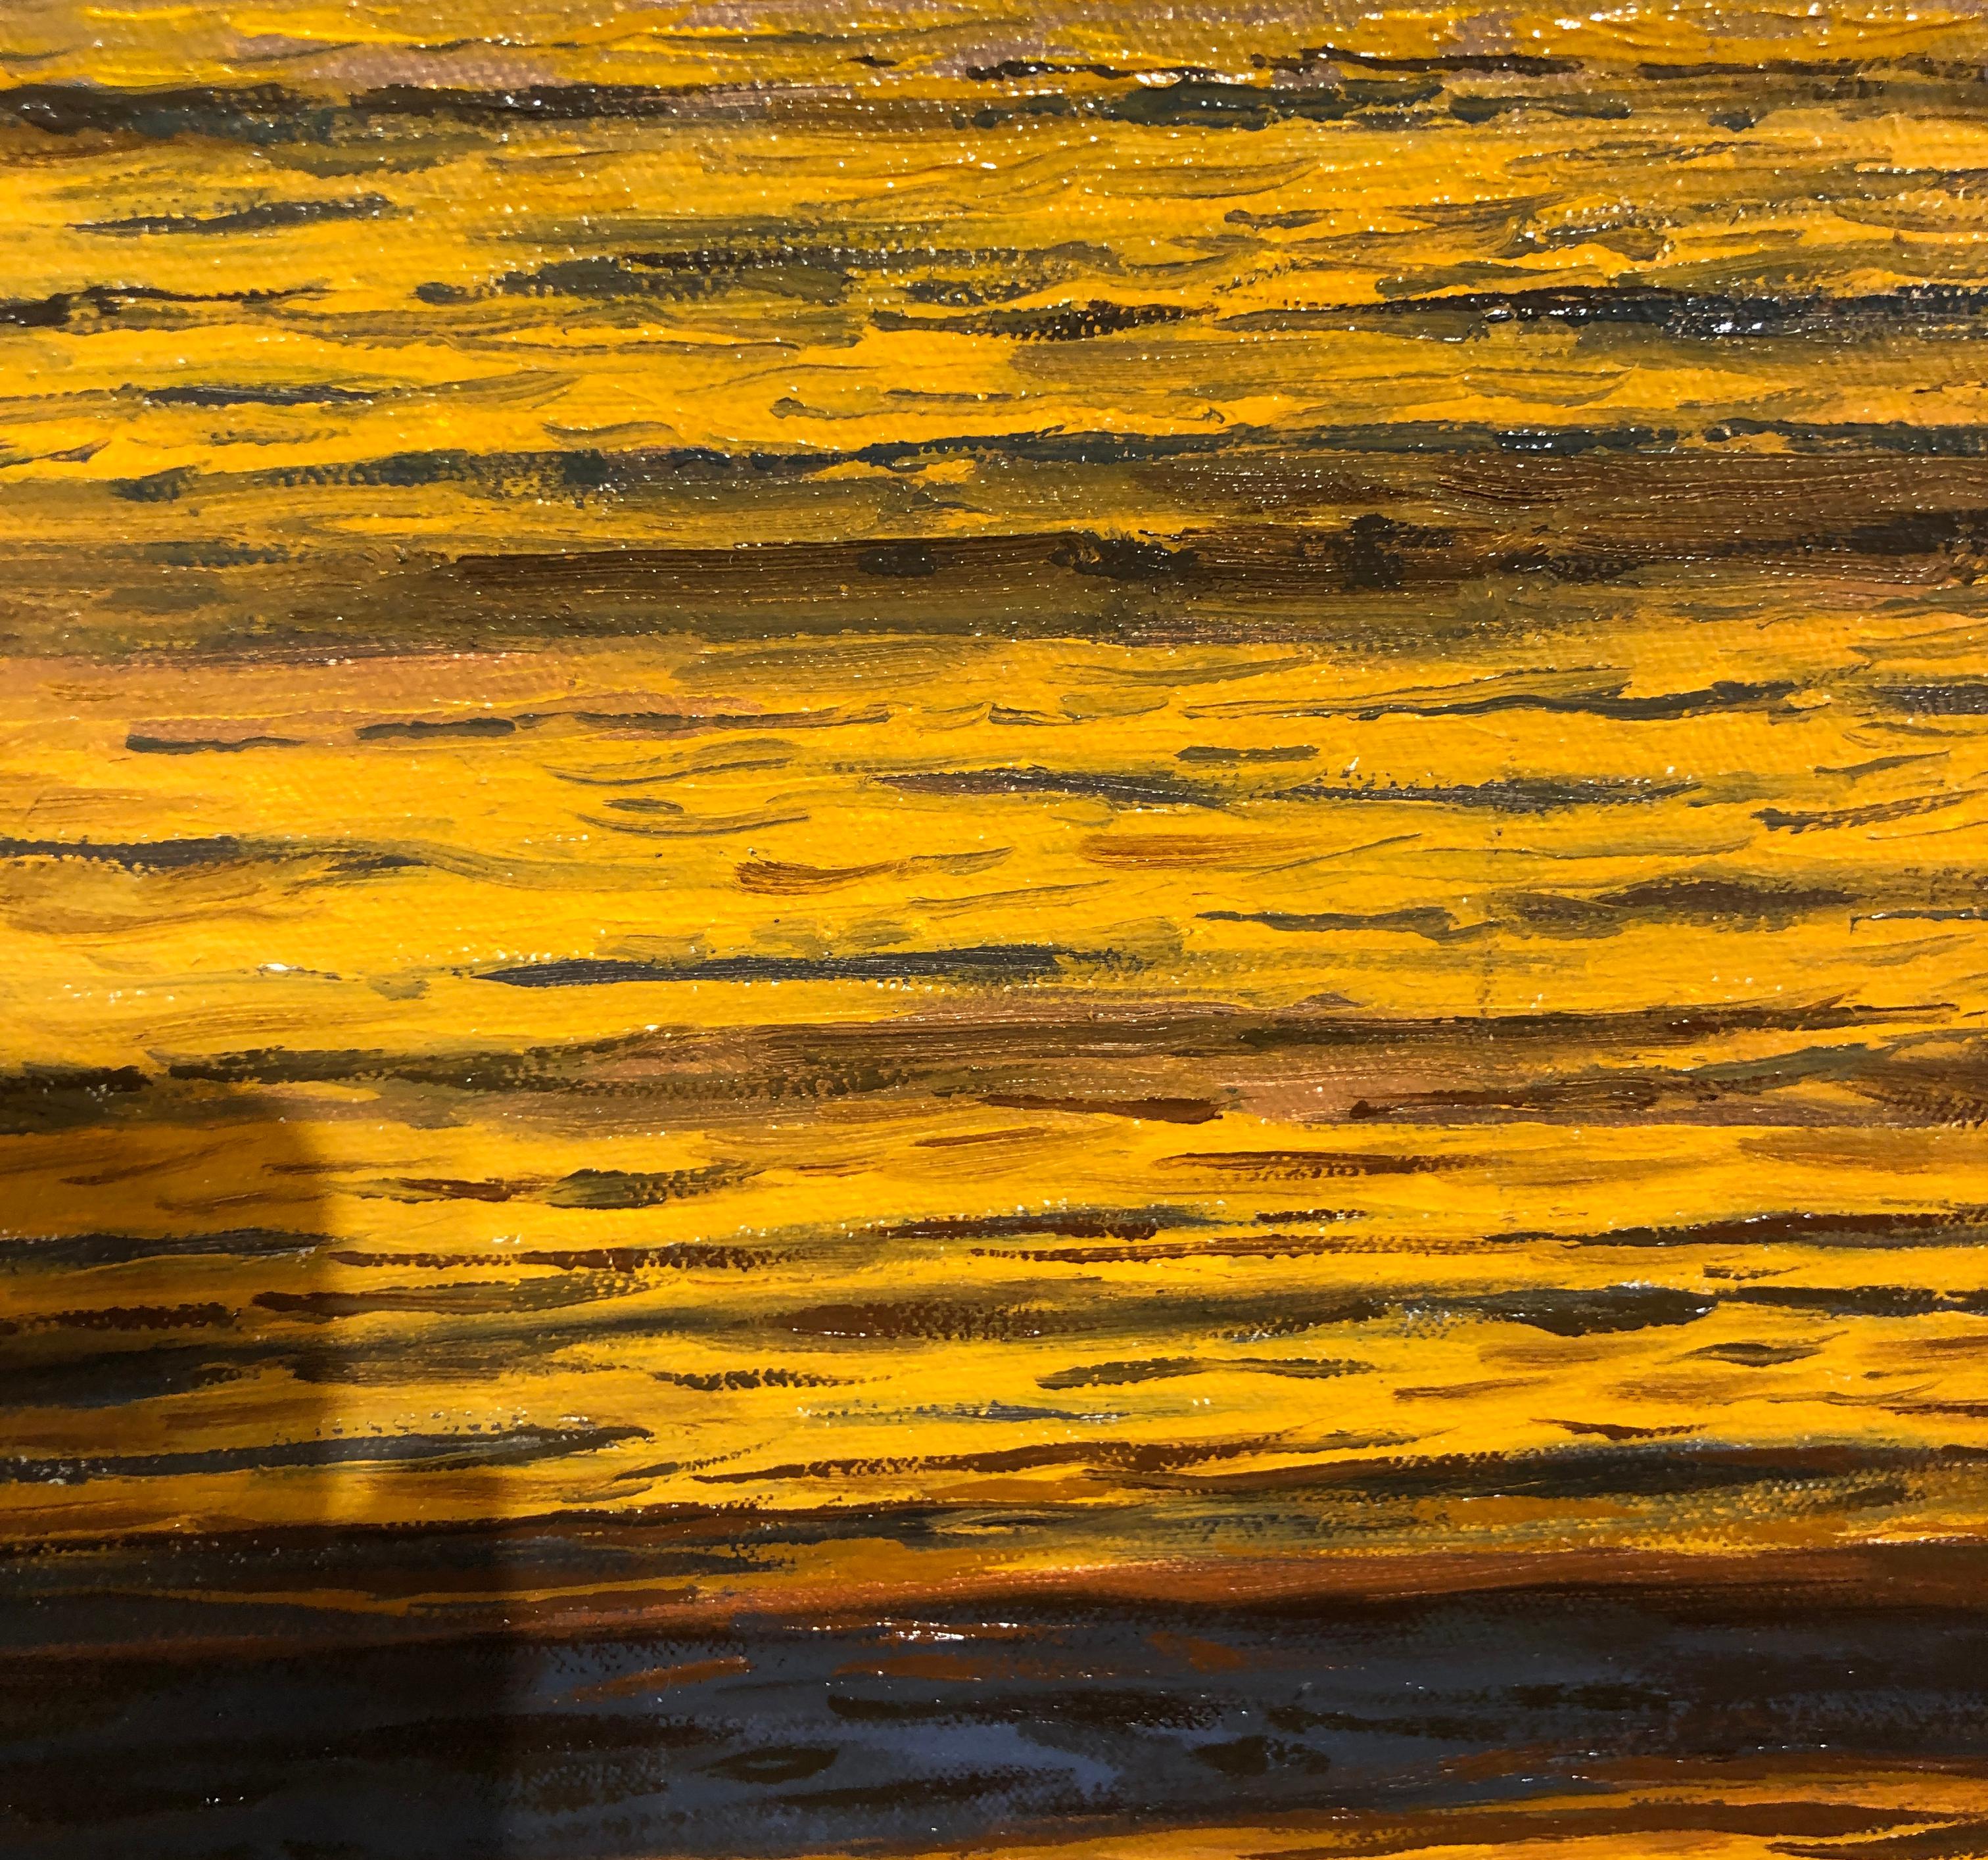 Oceans XIV - Original Oil Painting of Golden Sunset Reflected on Water 7